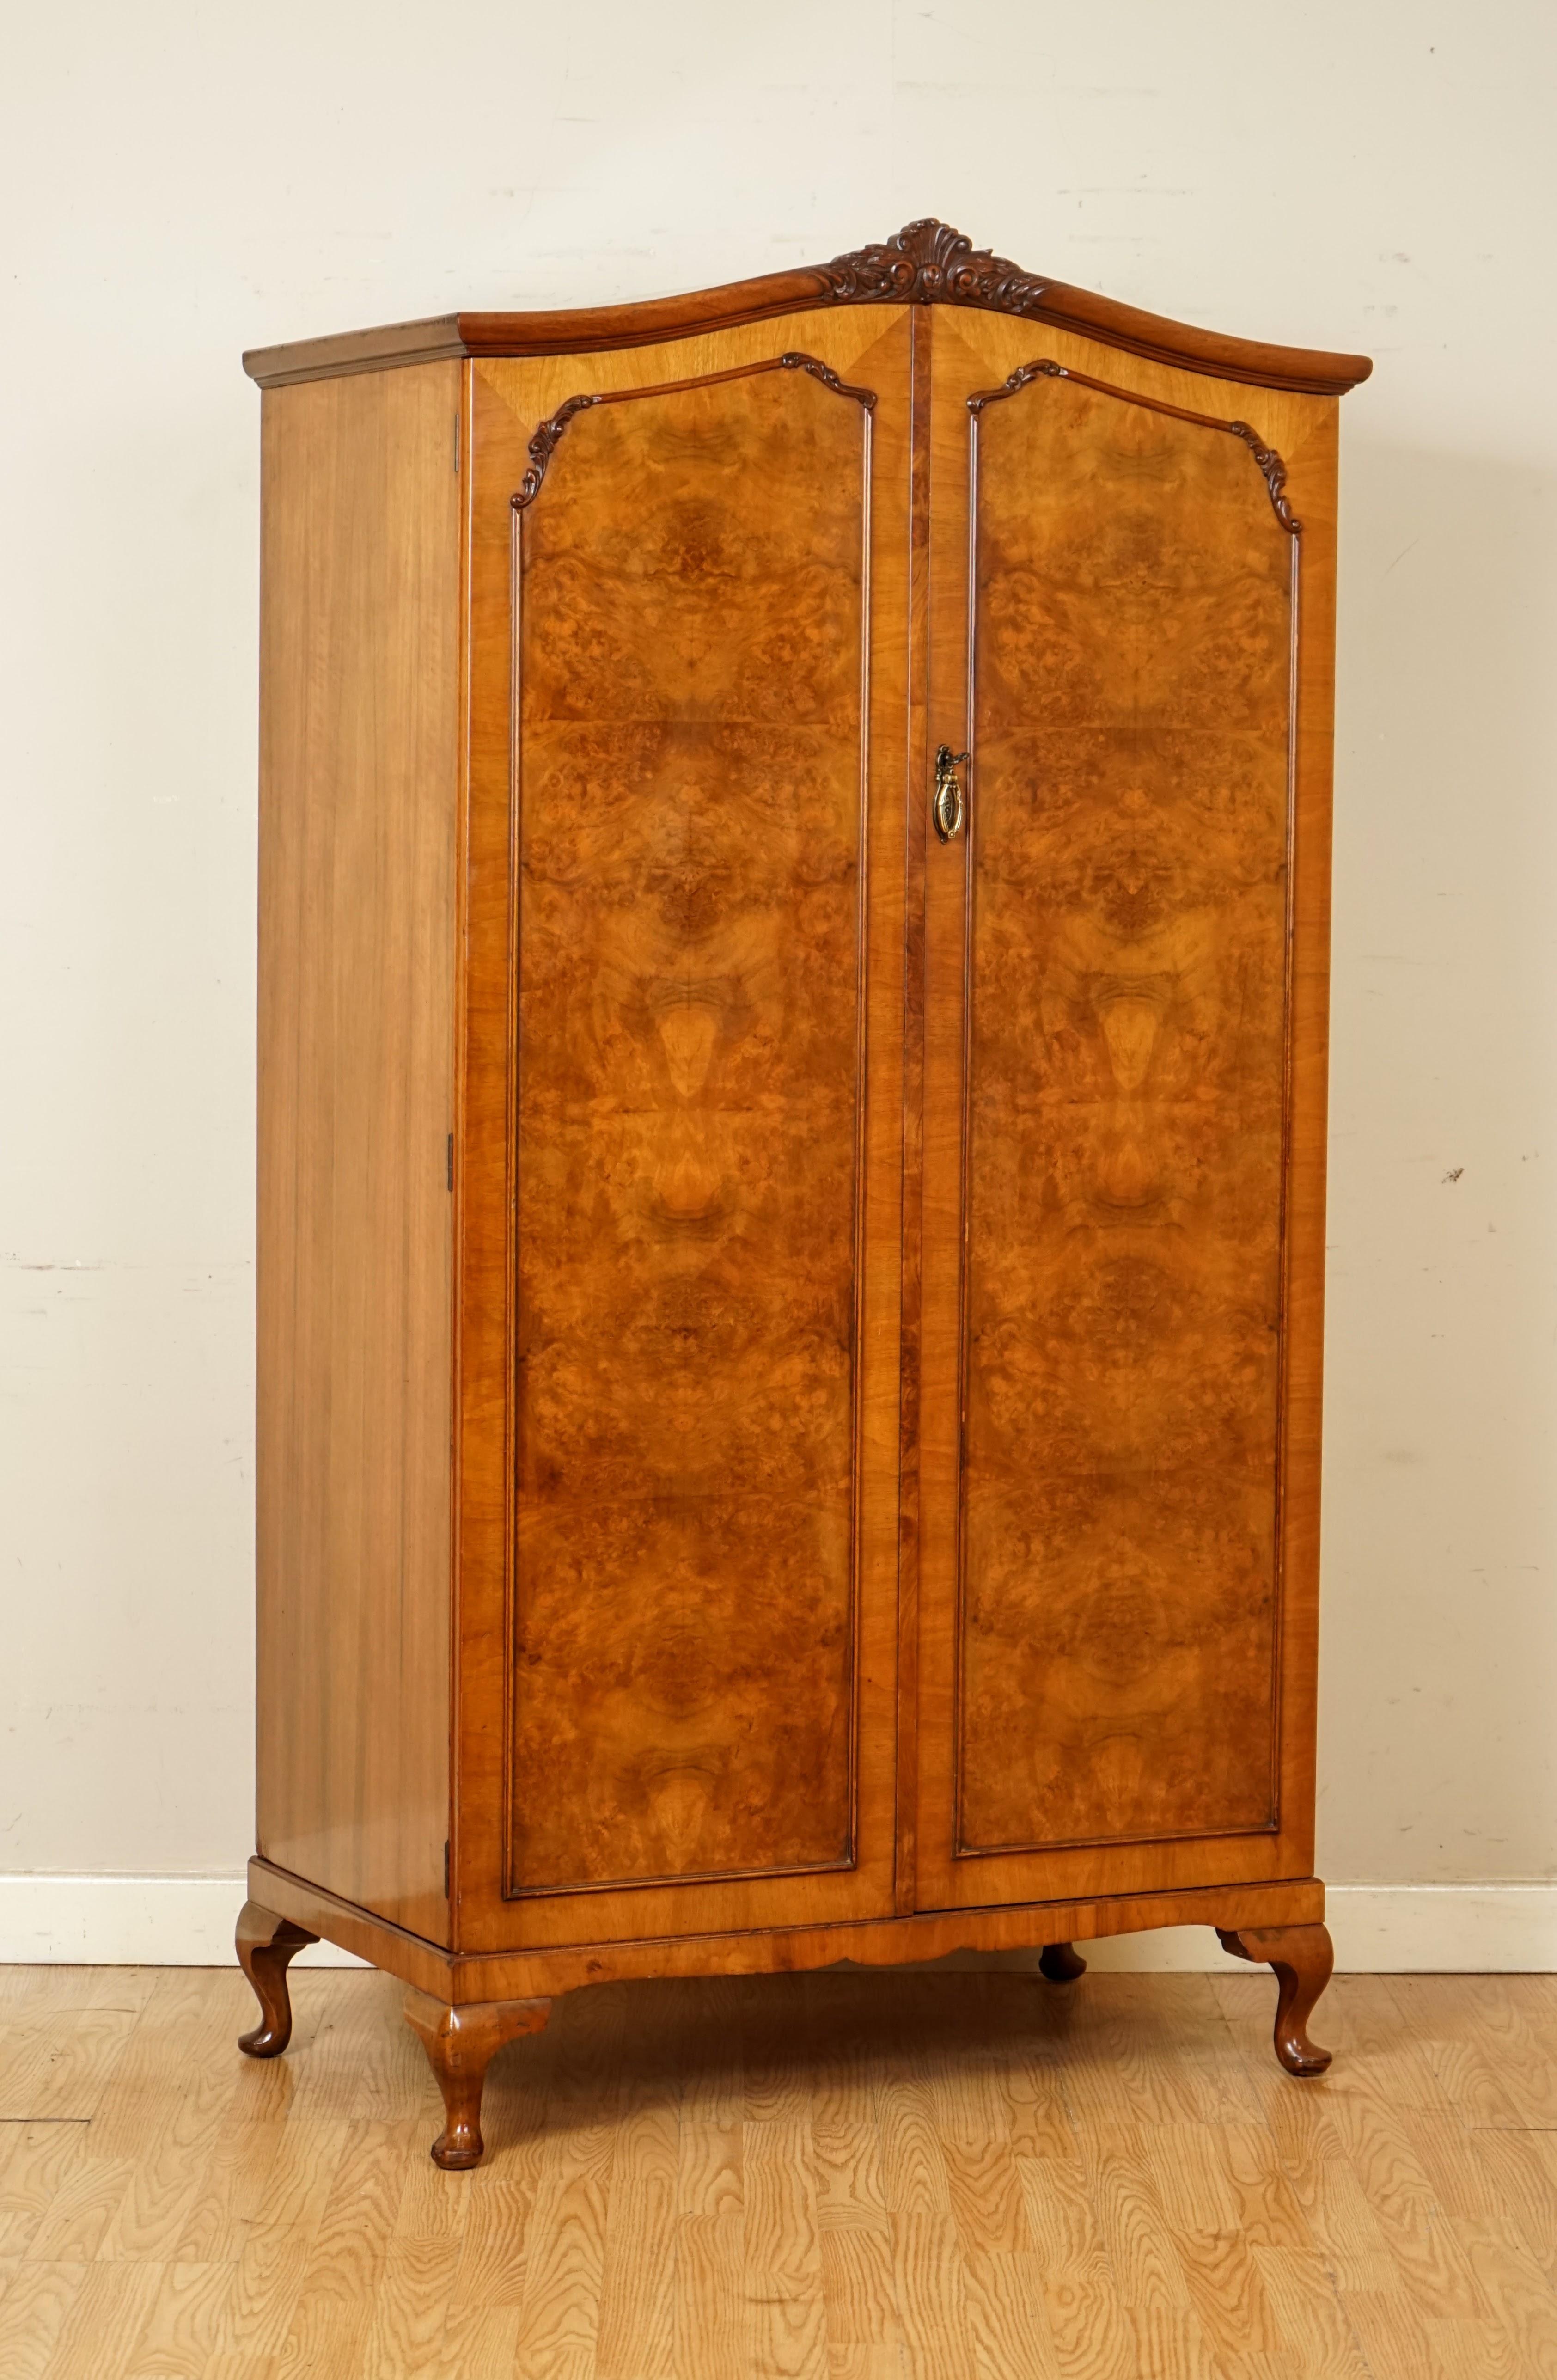 We are so excited to present to you this beautiful Alfred Cox London burr walnut double wardrobe.

Here we have a good quality antique English carved burr walnut wardrobe. Circa 1930's made by the British iconic designer and cabinetmaker, Alfred